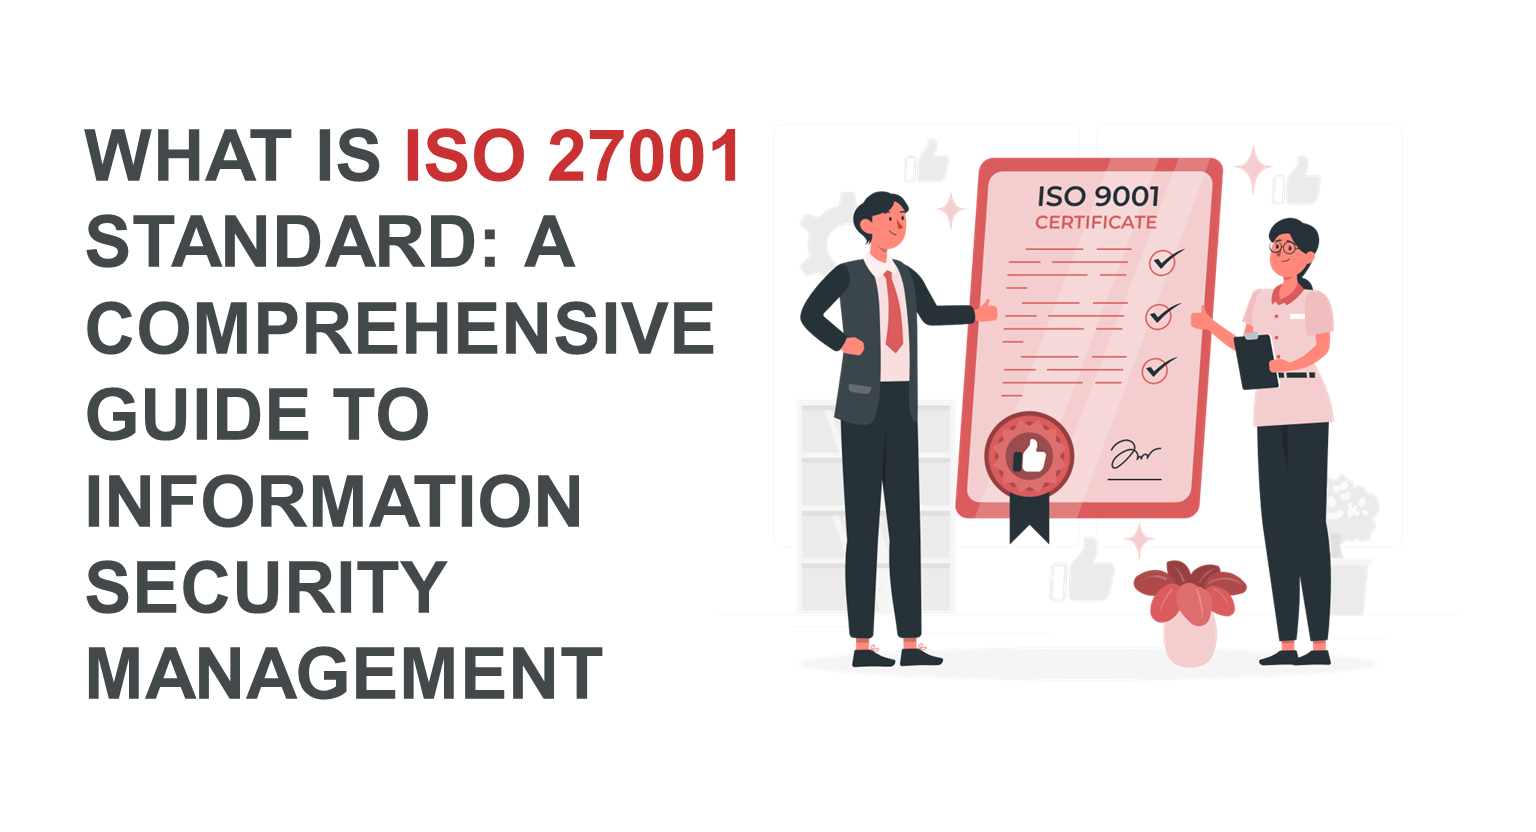 What is ISO 27001 Standard: A Comprehensive Guide to Information Security Management